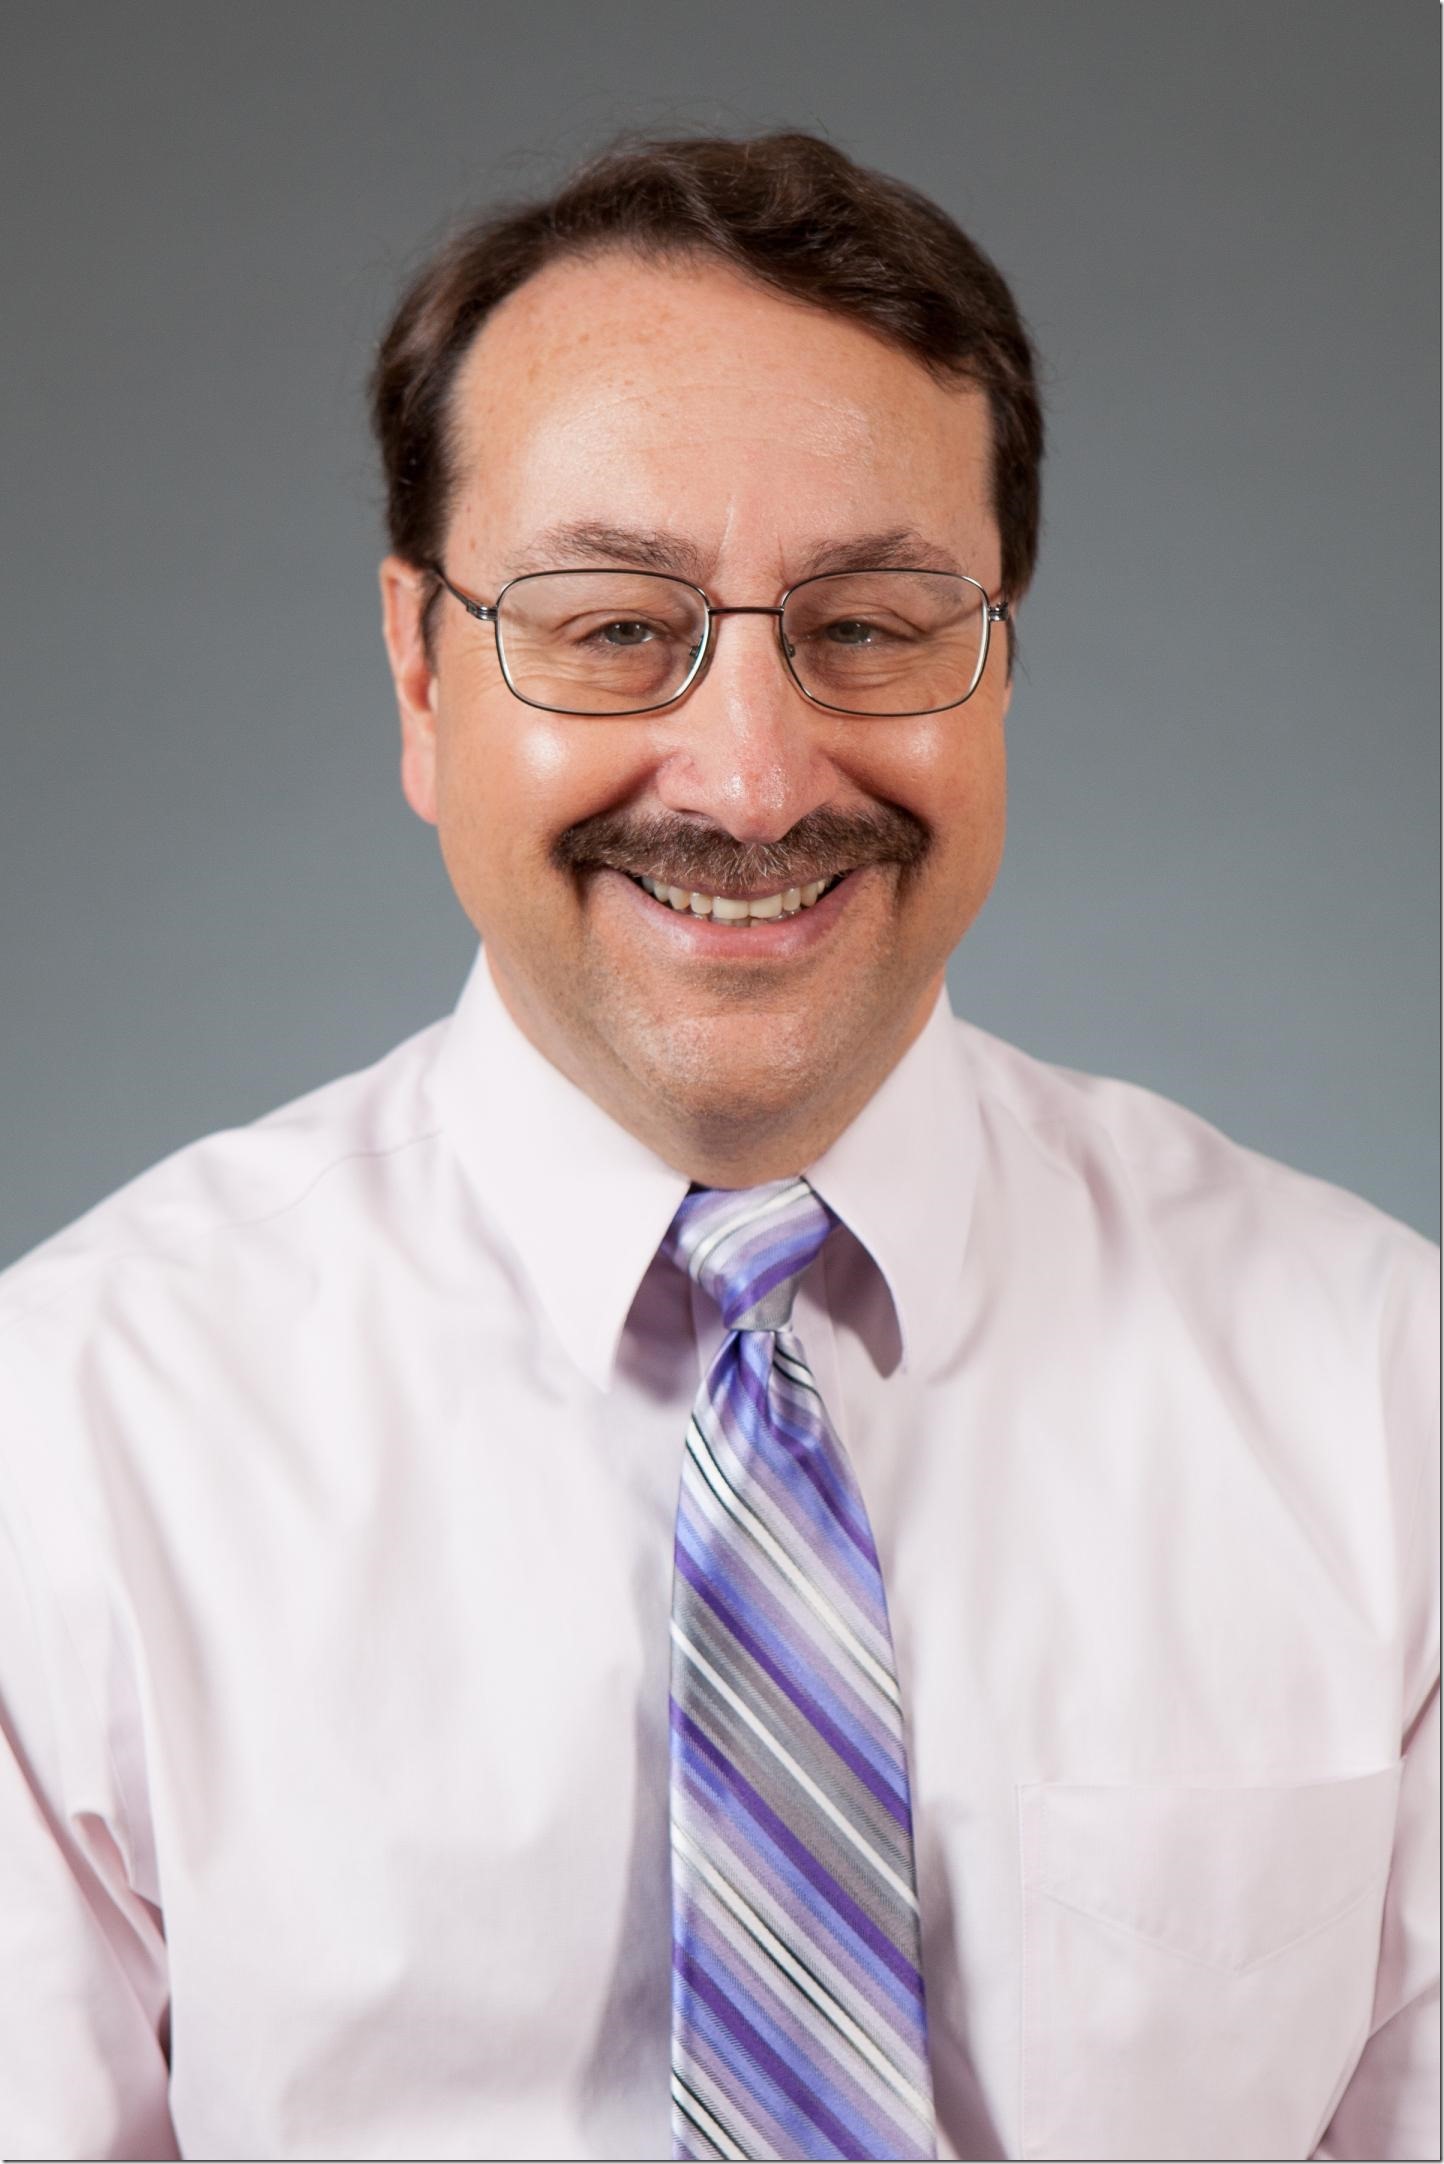 Barry Zingman, M.D., of Montefiore Health System and Albert Einstein College of Medicine, is leading a clinical trial at the institution to evaluate the experimental drug remdesivir to treat people who are hospitalized with severe COVID-19 infection. Credit Albert Einstein College of Medicine